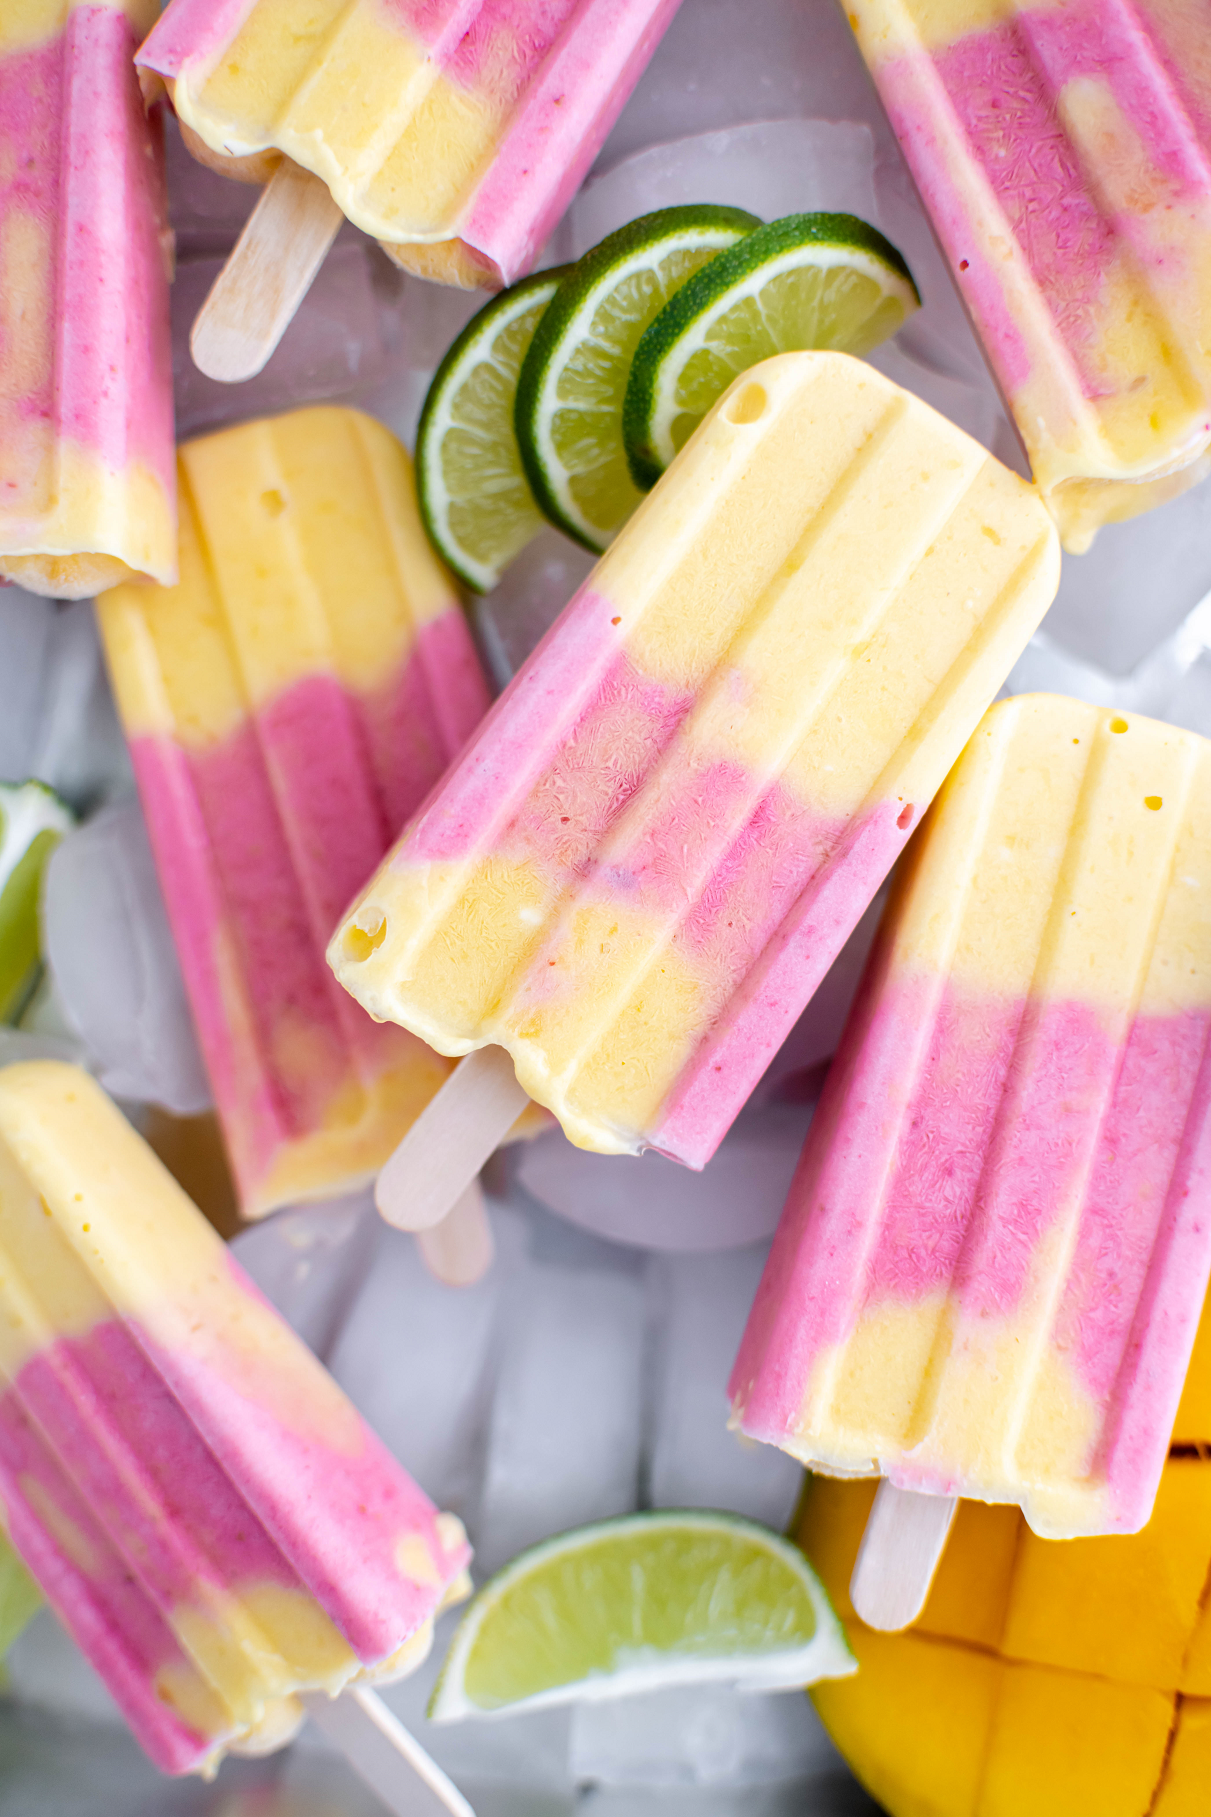 Layer of ice cubes topped with strawberry mango popsicles. Garnish of lime slices and half a mango.